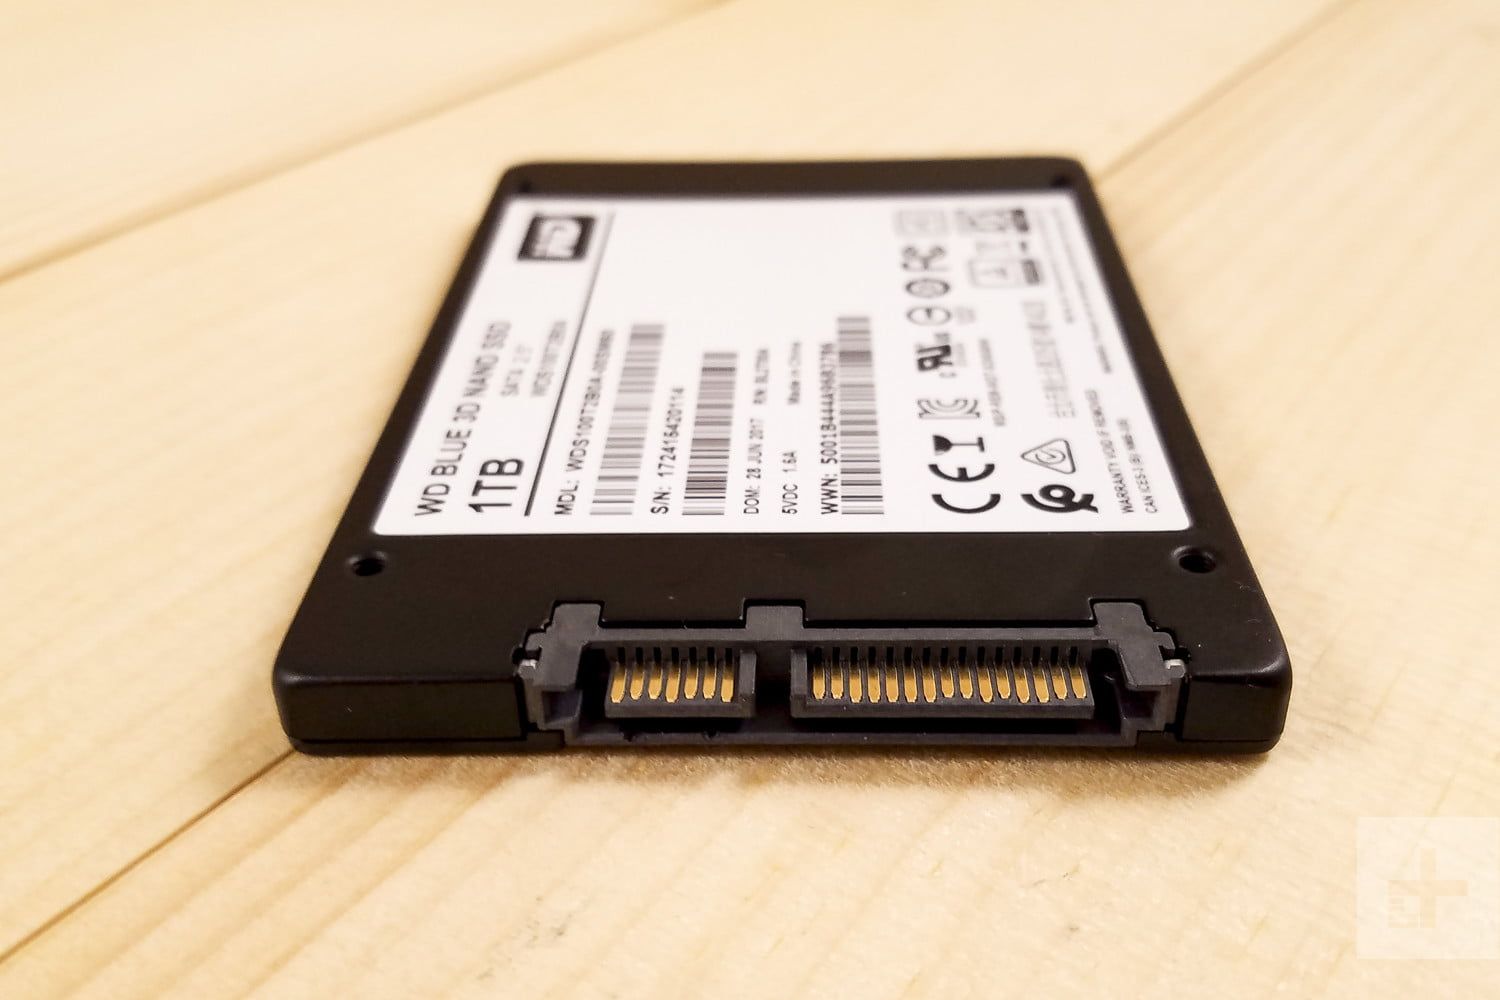 wd-sandisk-ssd-quick-review-13581-1500x1000.jpg